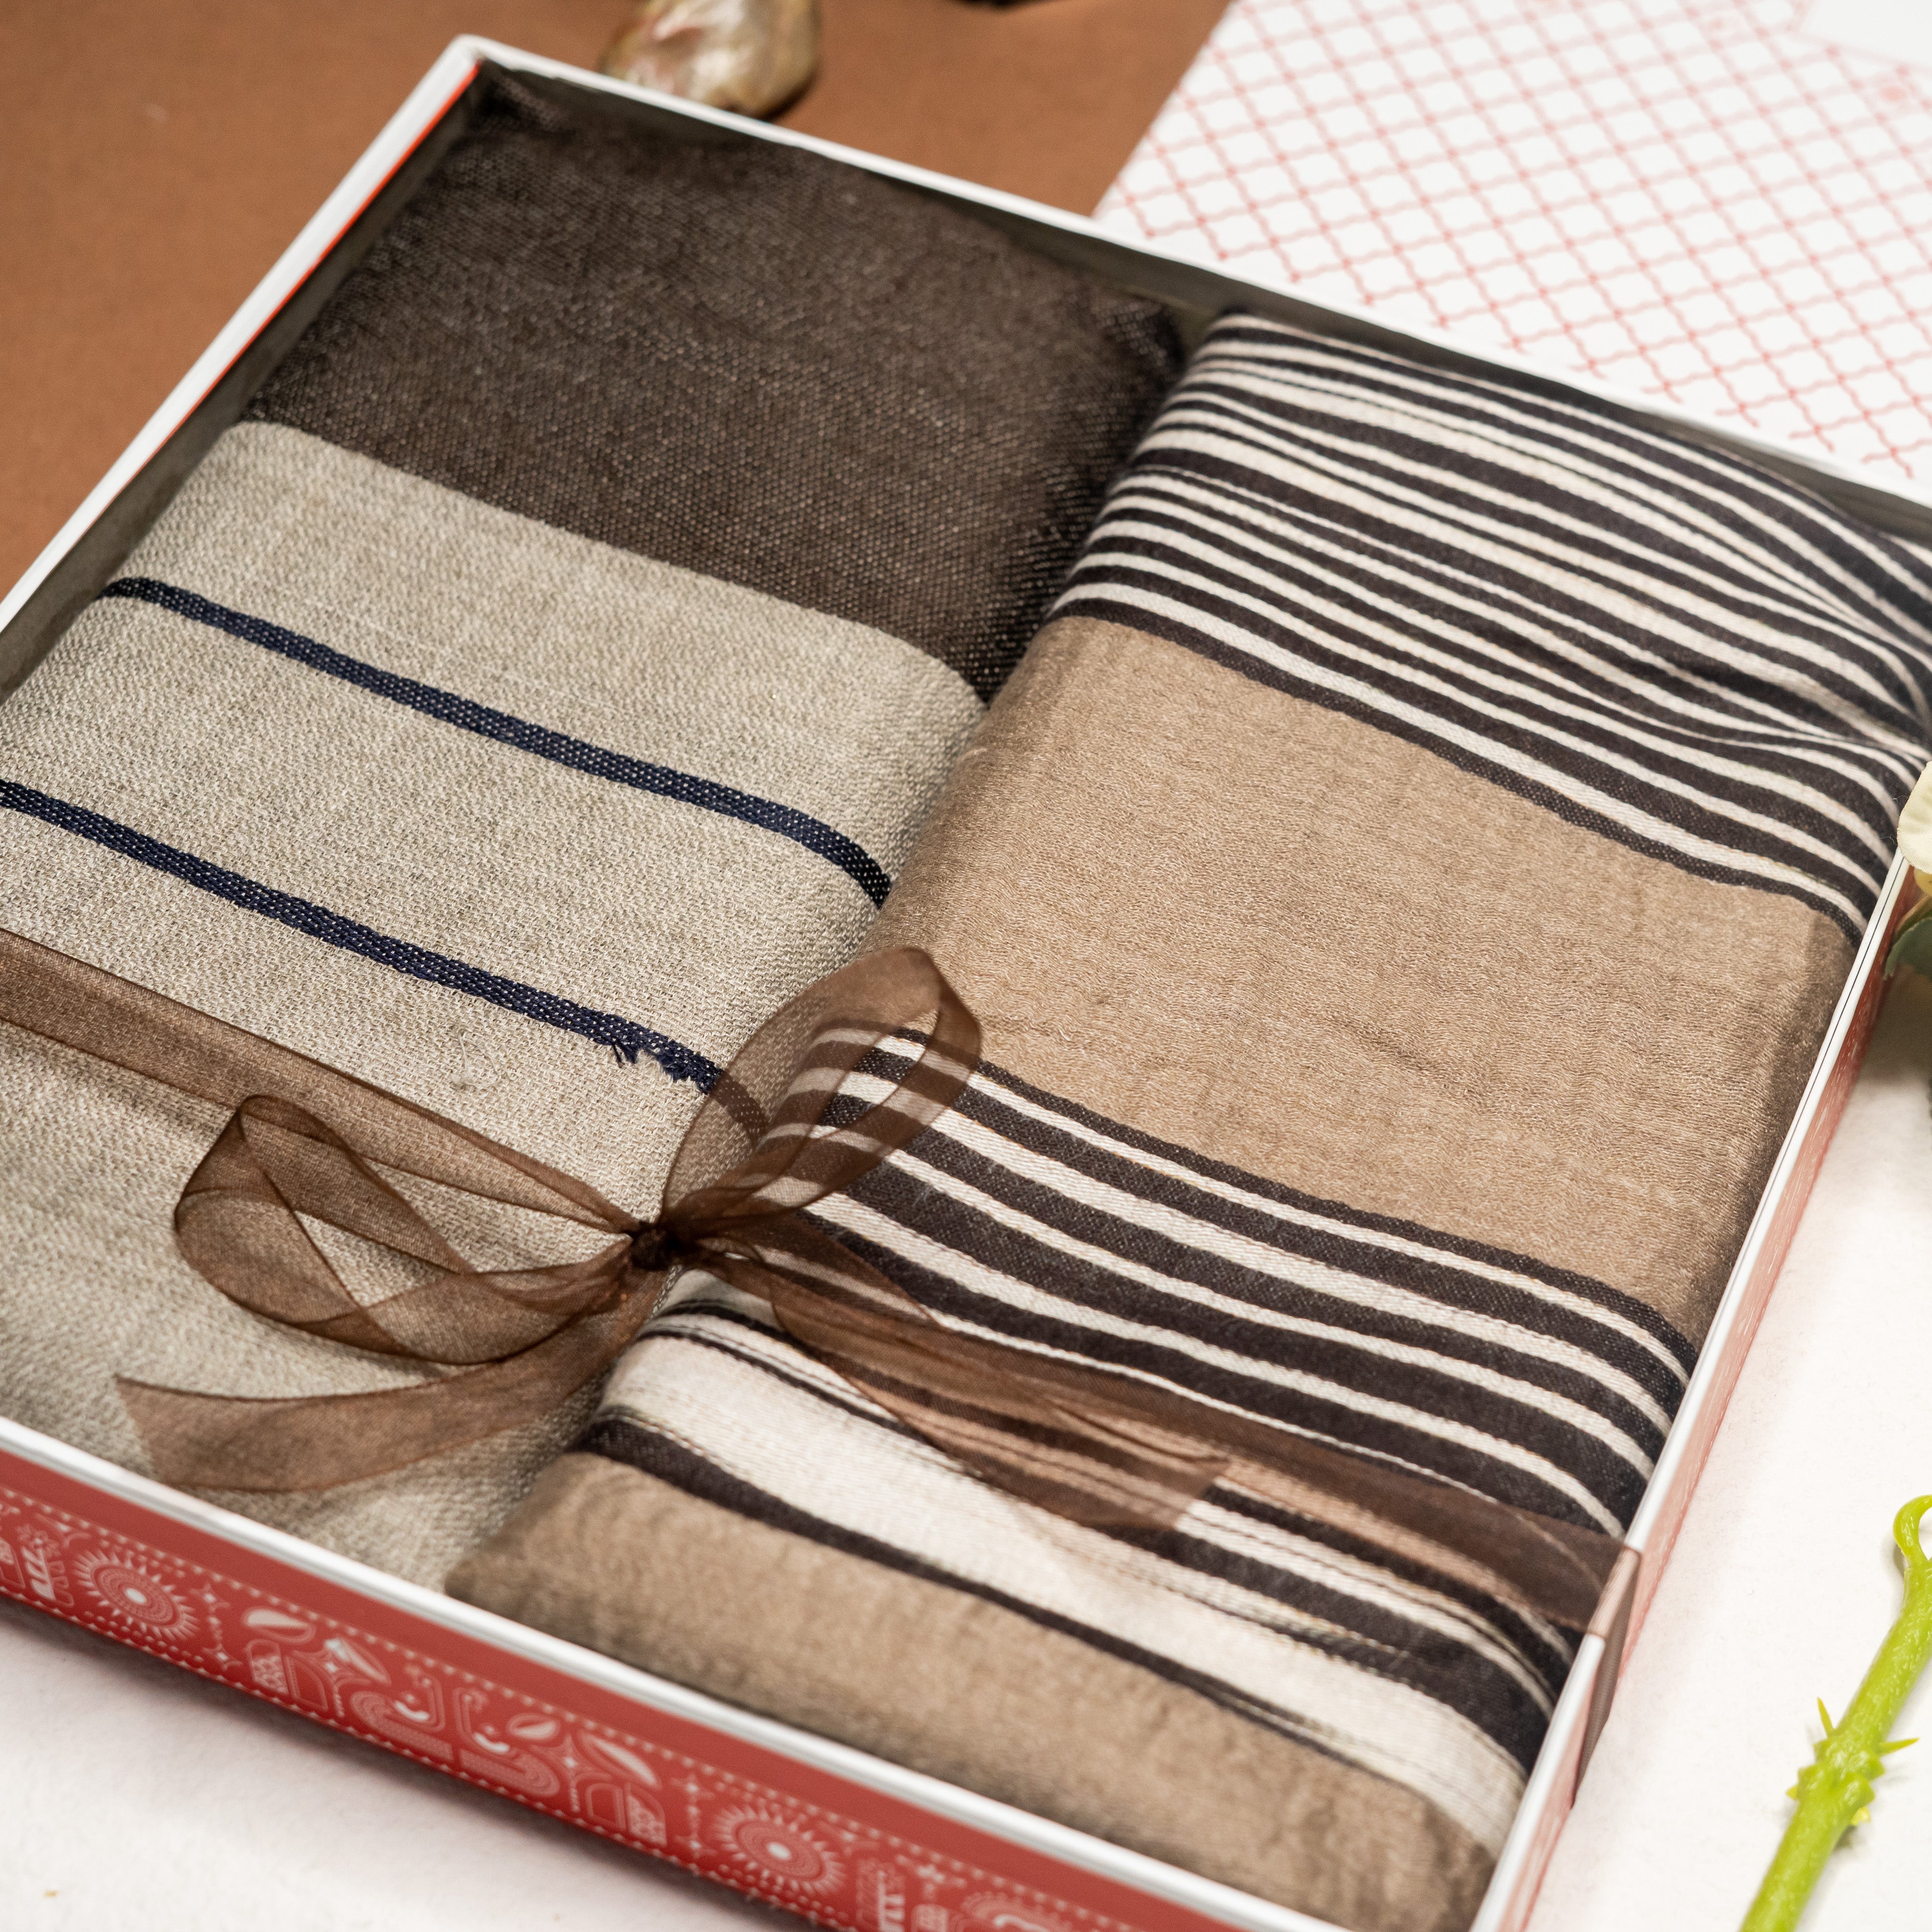 OMVAI Patterned Striped Pashmina Combo Gift Set in Pure wool (Set of 2 - For HIM and for HER)